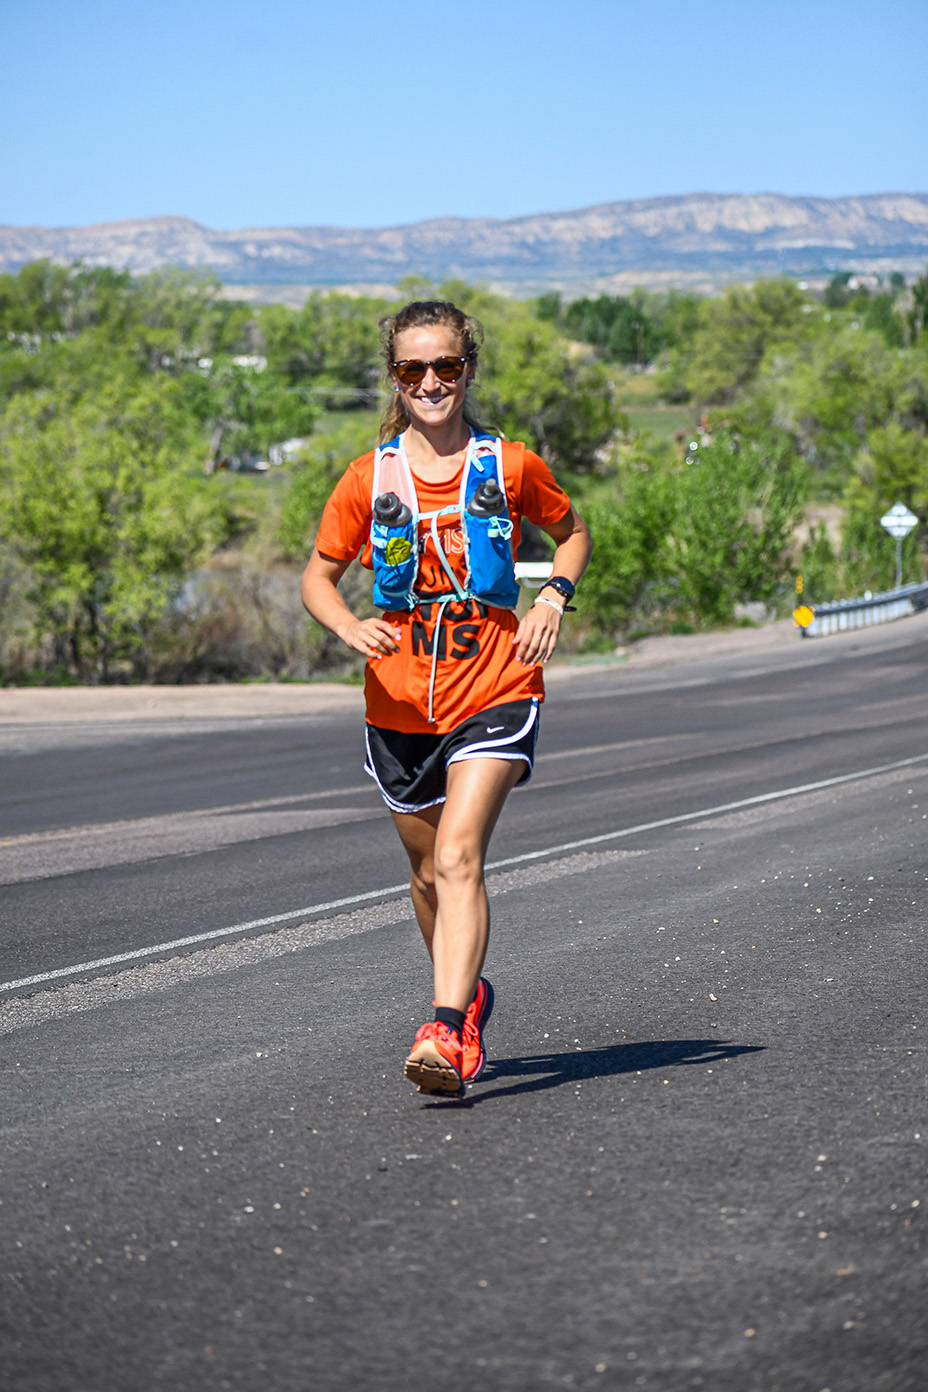 Meghan Guhler 鈥�16 running on road with mountains behind her